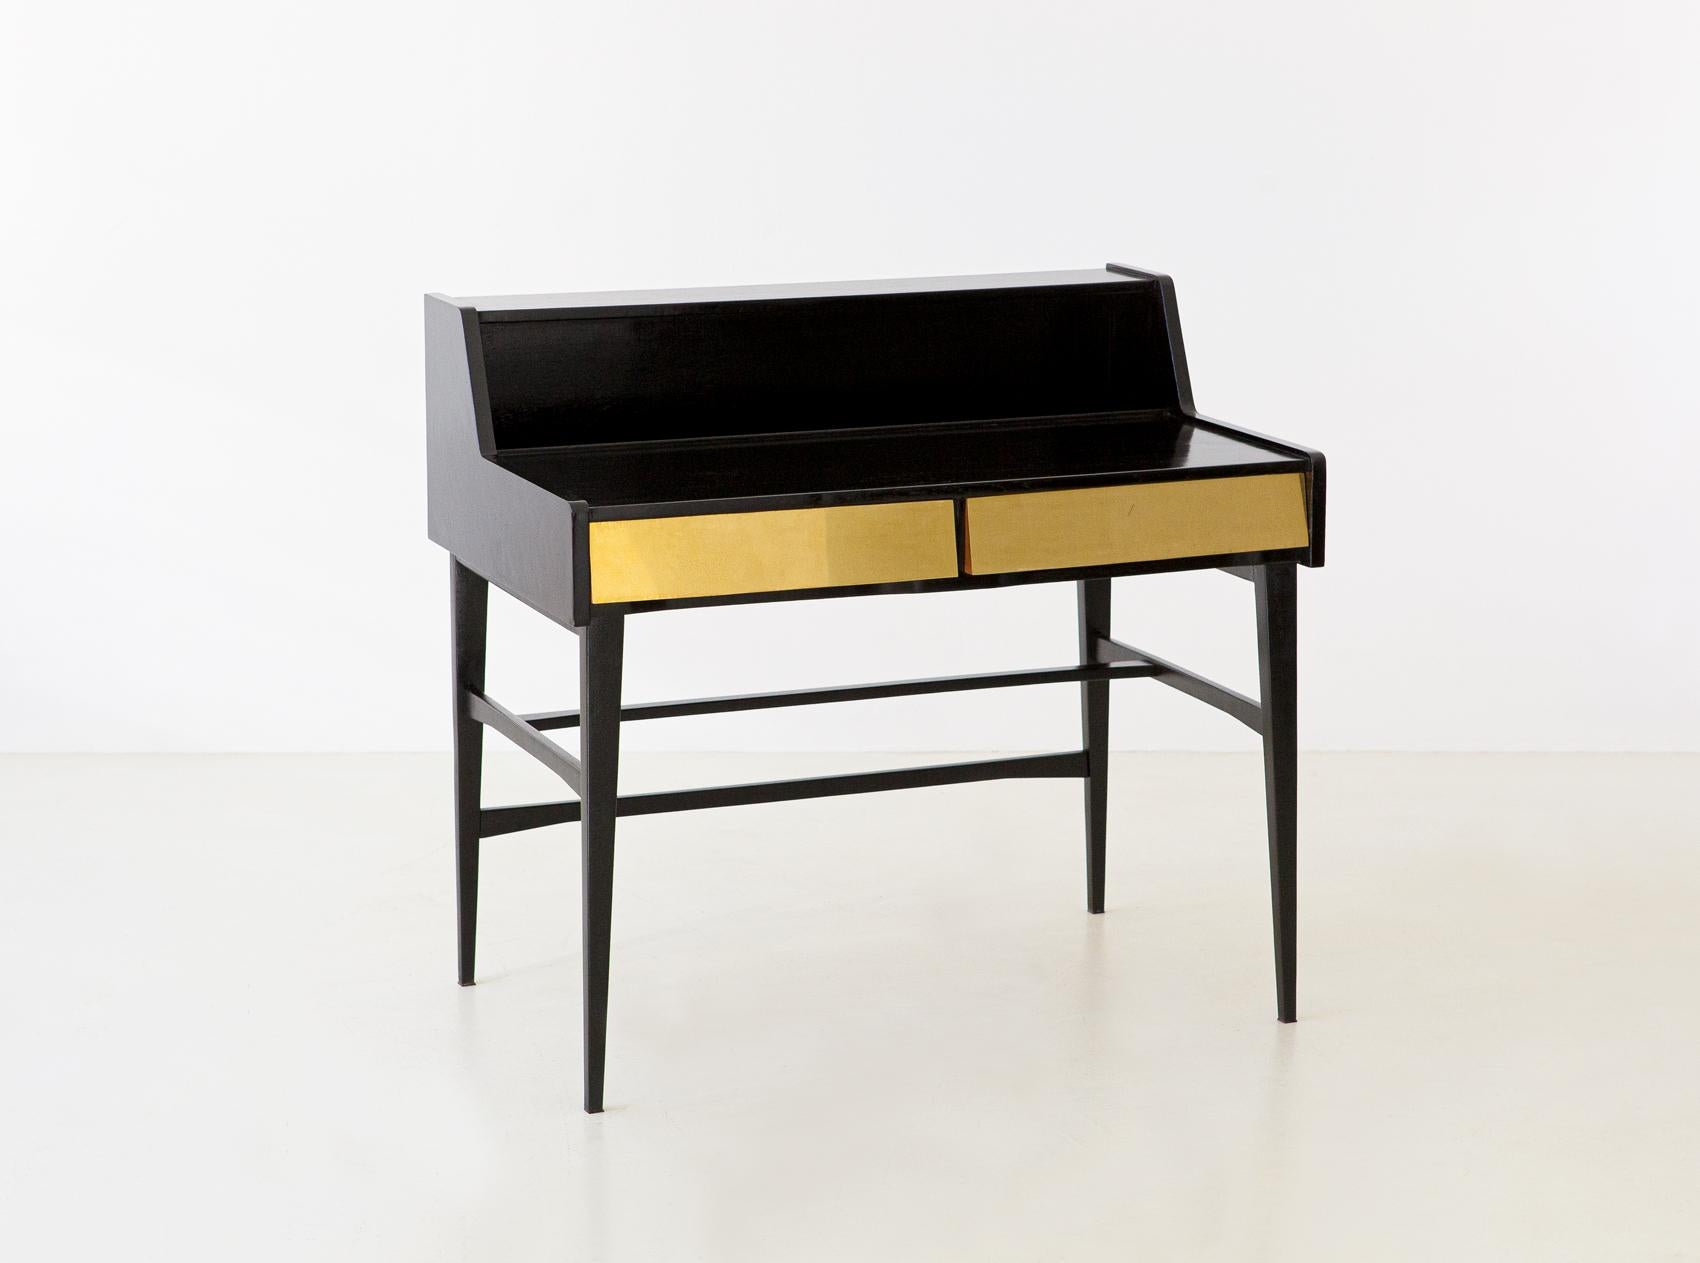 Italian modern writing table with row brass laminated drawers

Made of black lacquered wood by hand with shellac

Elegant and precious, light and modern design

Fully restored

The brass has been polished (however, some very small signs